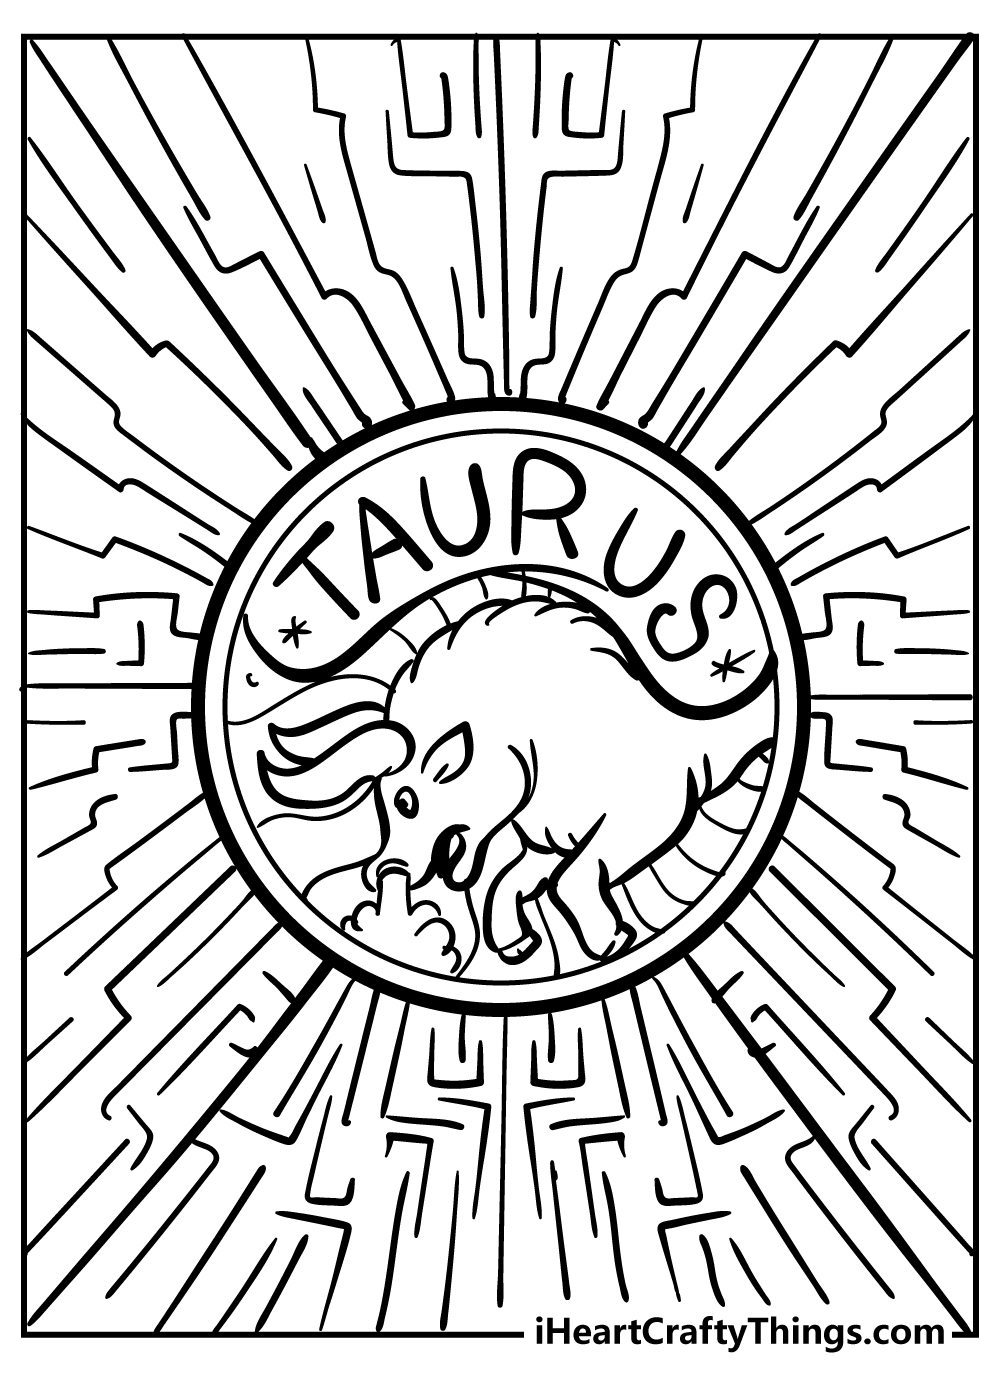 Zodiac Sign Coloring Book for adults free download